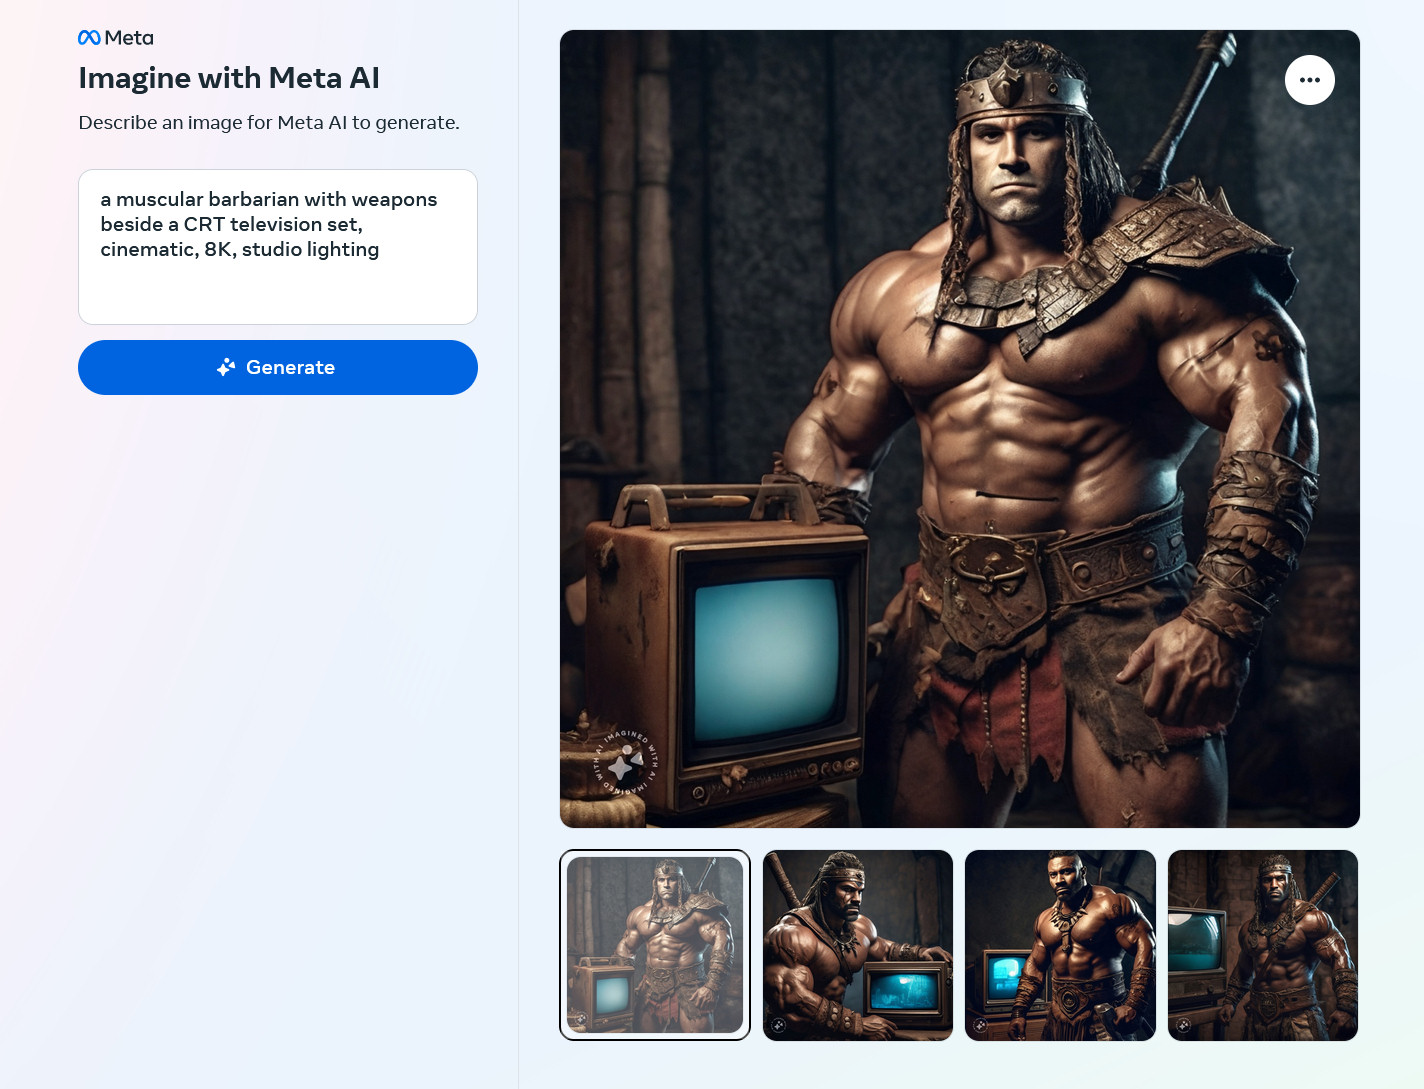 AI-generated images of a muscular barbarian with weapons beside a CRT television set, cinematic, 8K, studio lighting created by Meta Emu on the Imagine with Meta AI website.